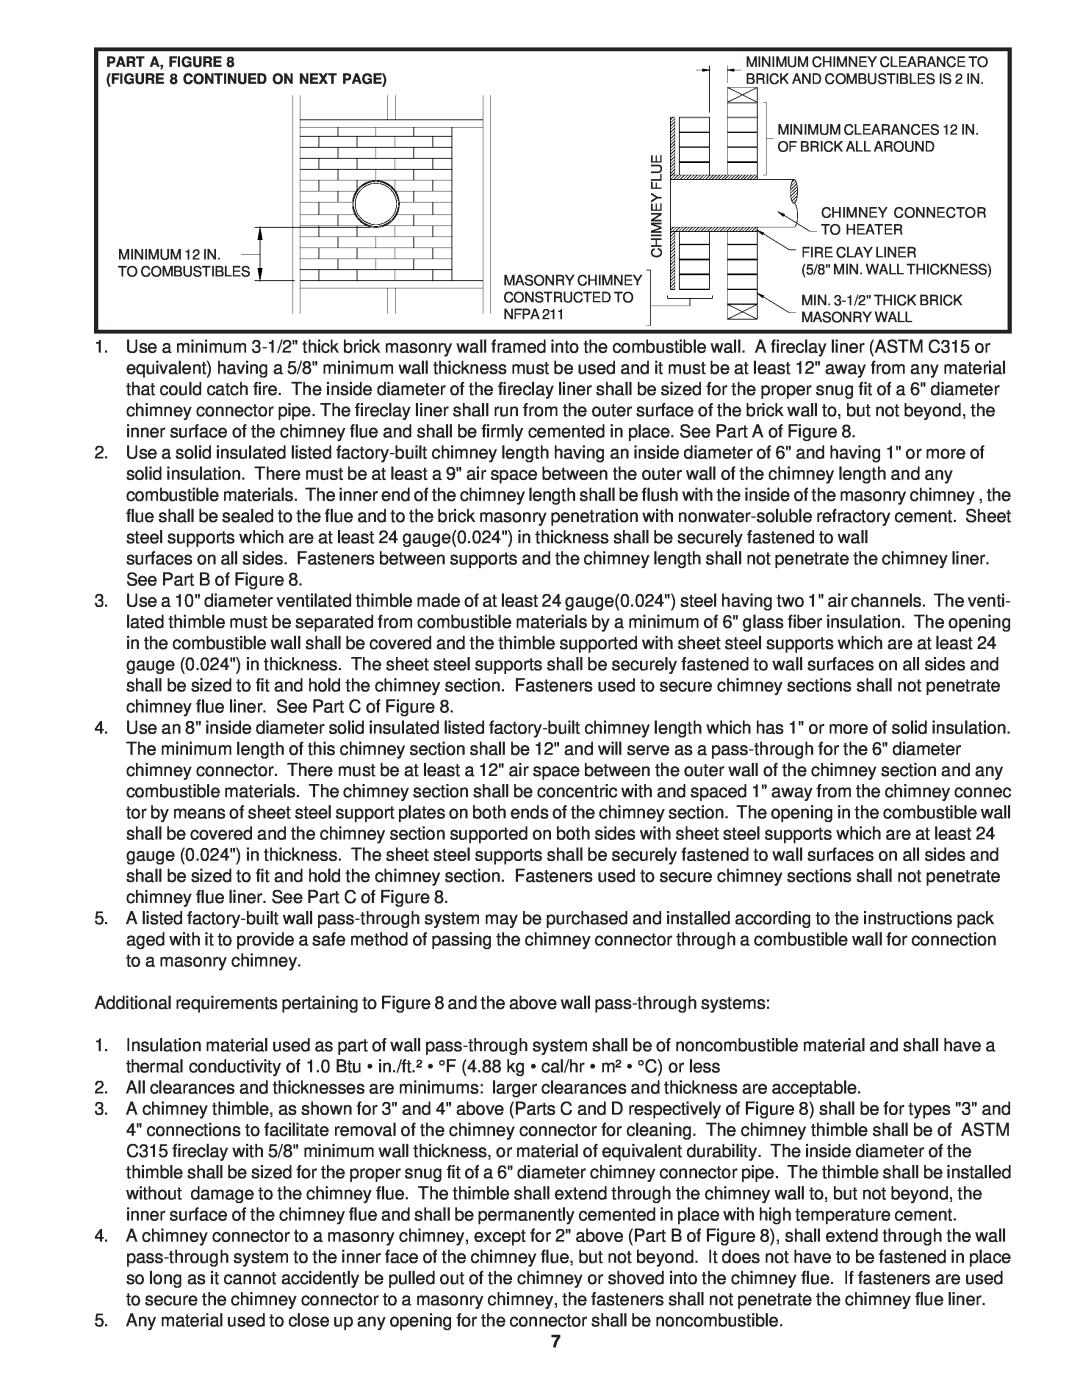 United States Stove 1261 owner manual Part A, Figure Continued On Next Page, MINIMUM 12 IN TO COMBUSTIBLES, Masonry Wall 